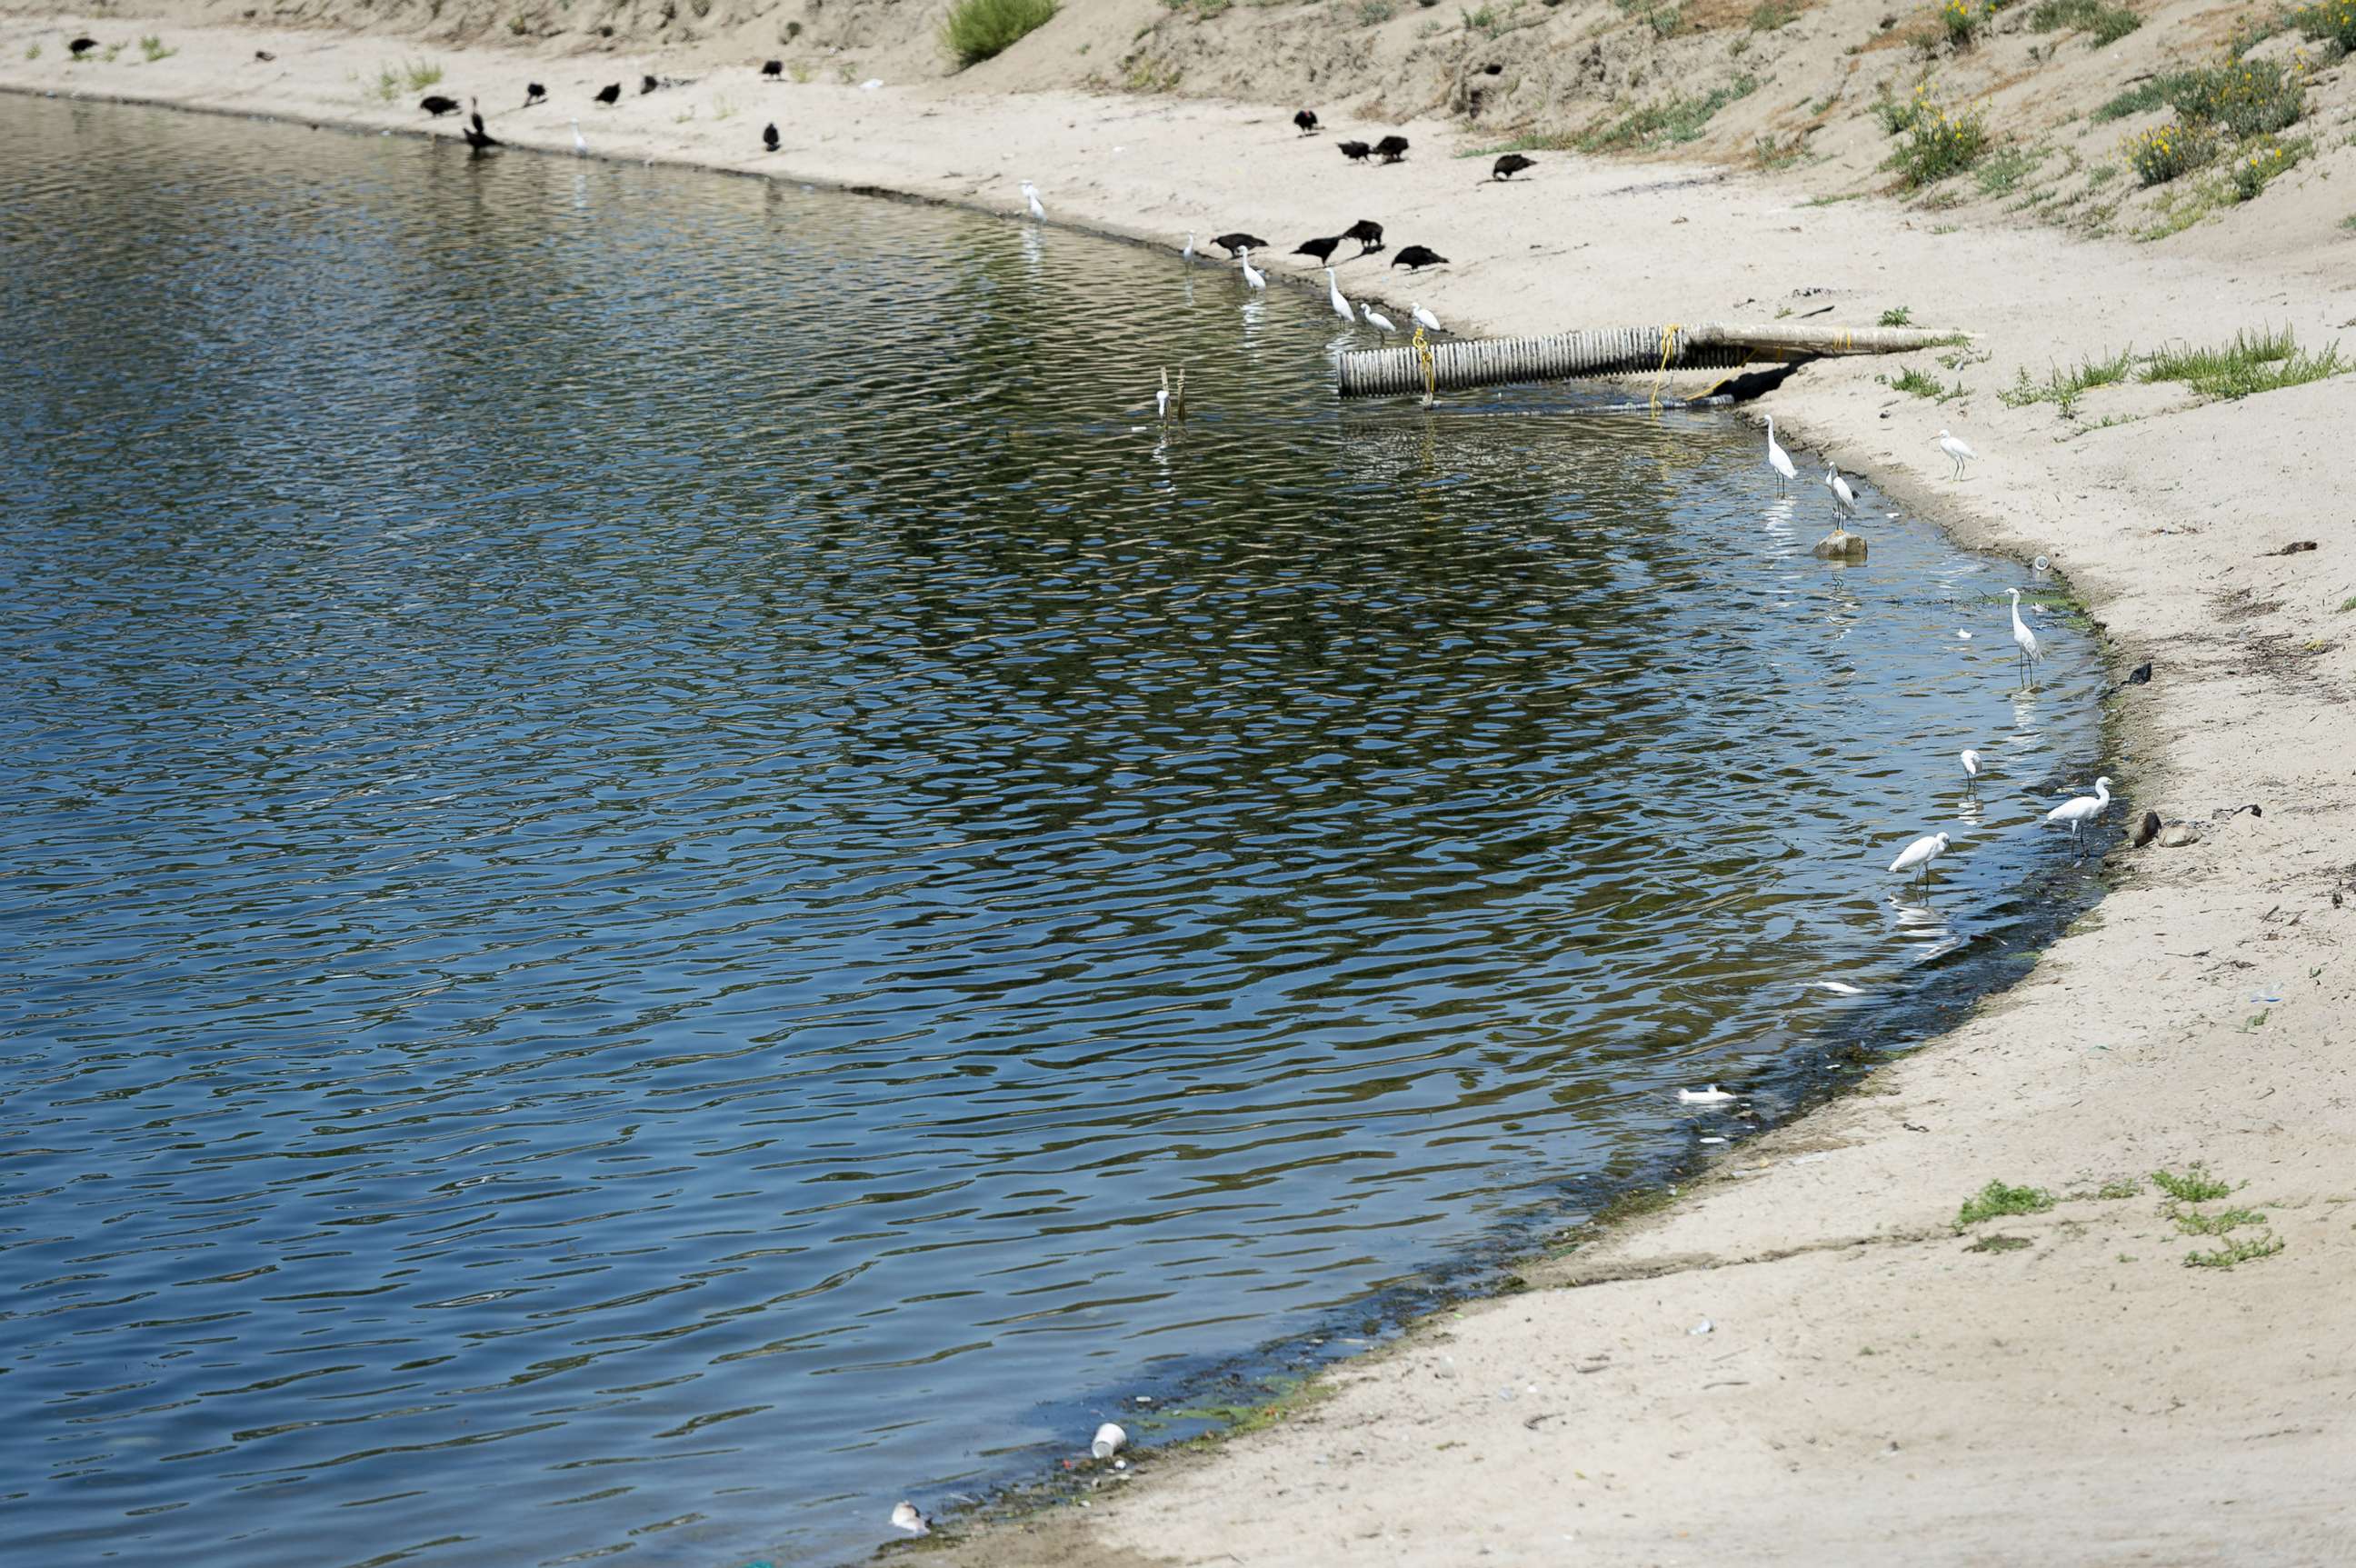 PHOTO: In this August 26, 2019, file photo, shore birds feed along the shore of one of the water basins used by the Yorba Linda Water District in Anaheim, CA.